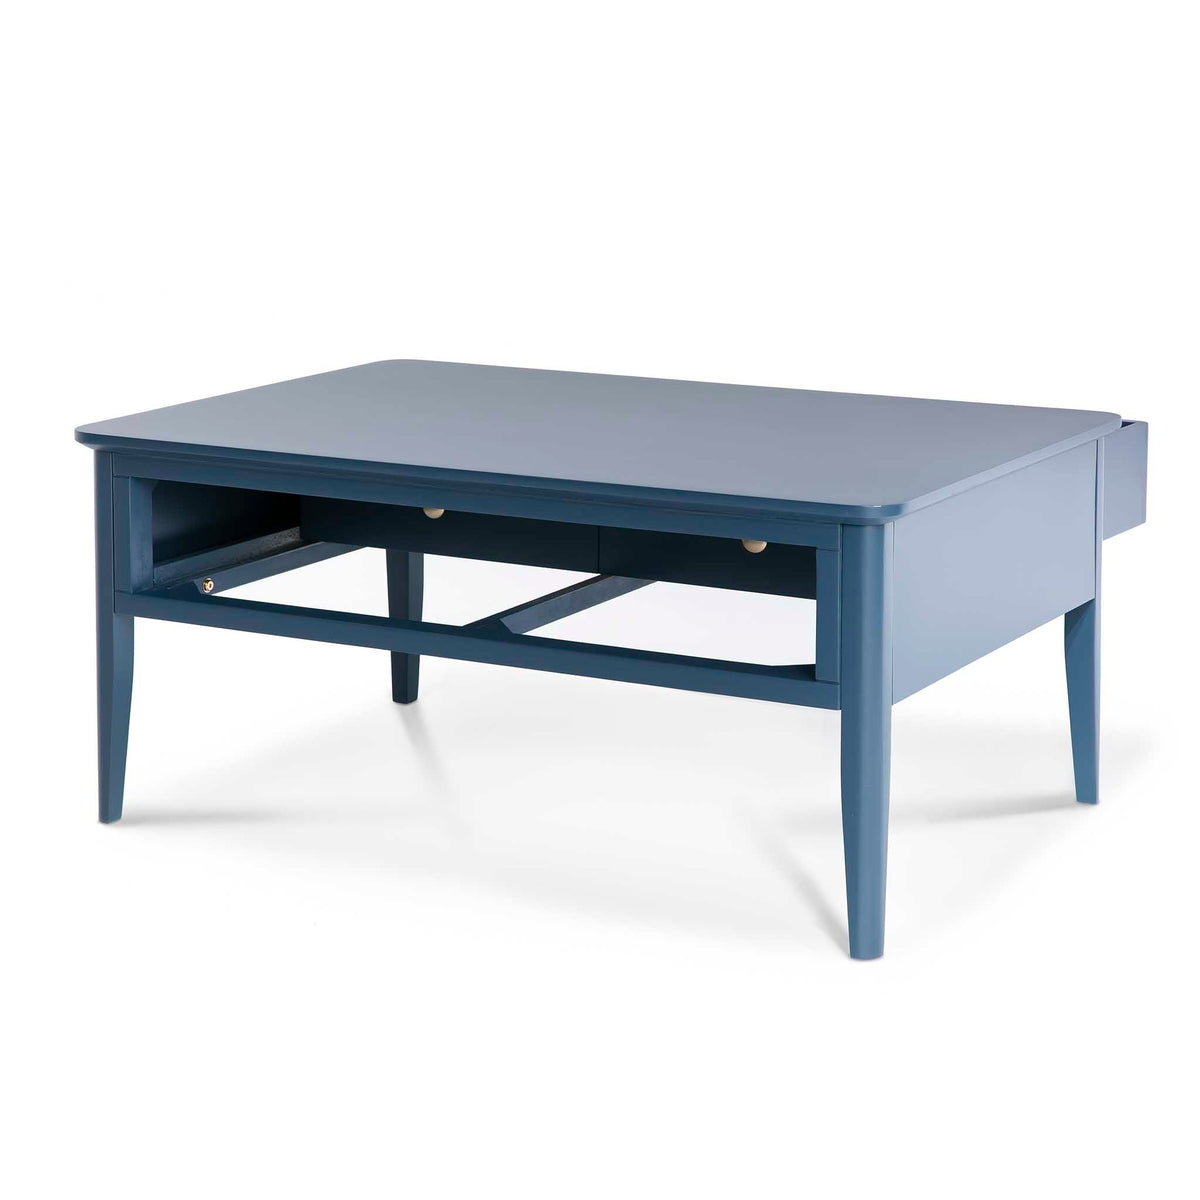 Stirling Blue Coffee Table - Side view with drawer open other side